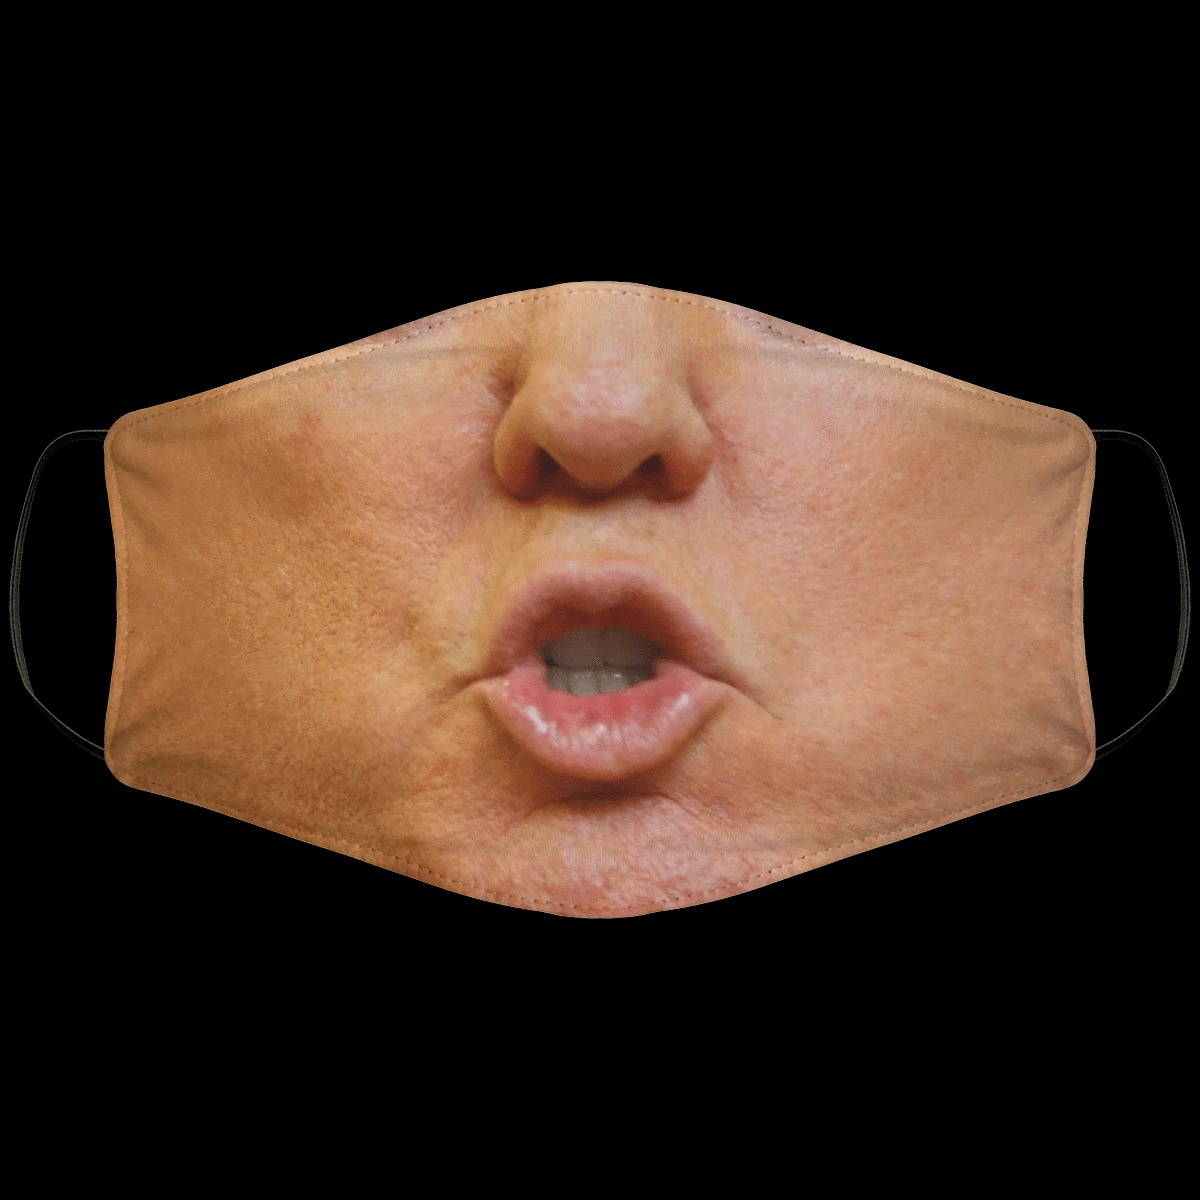 Trump's Mouth face mask